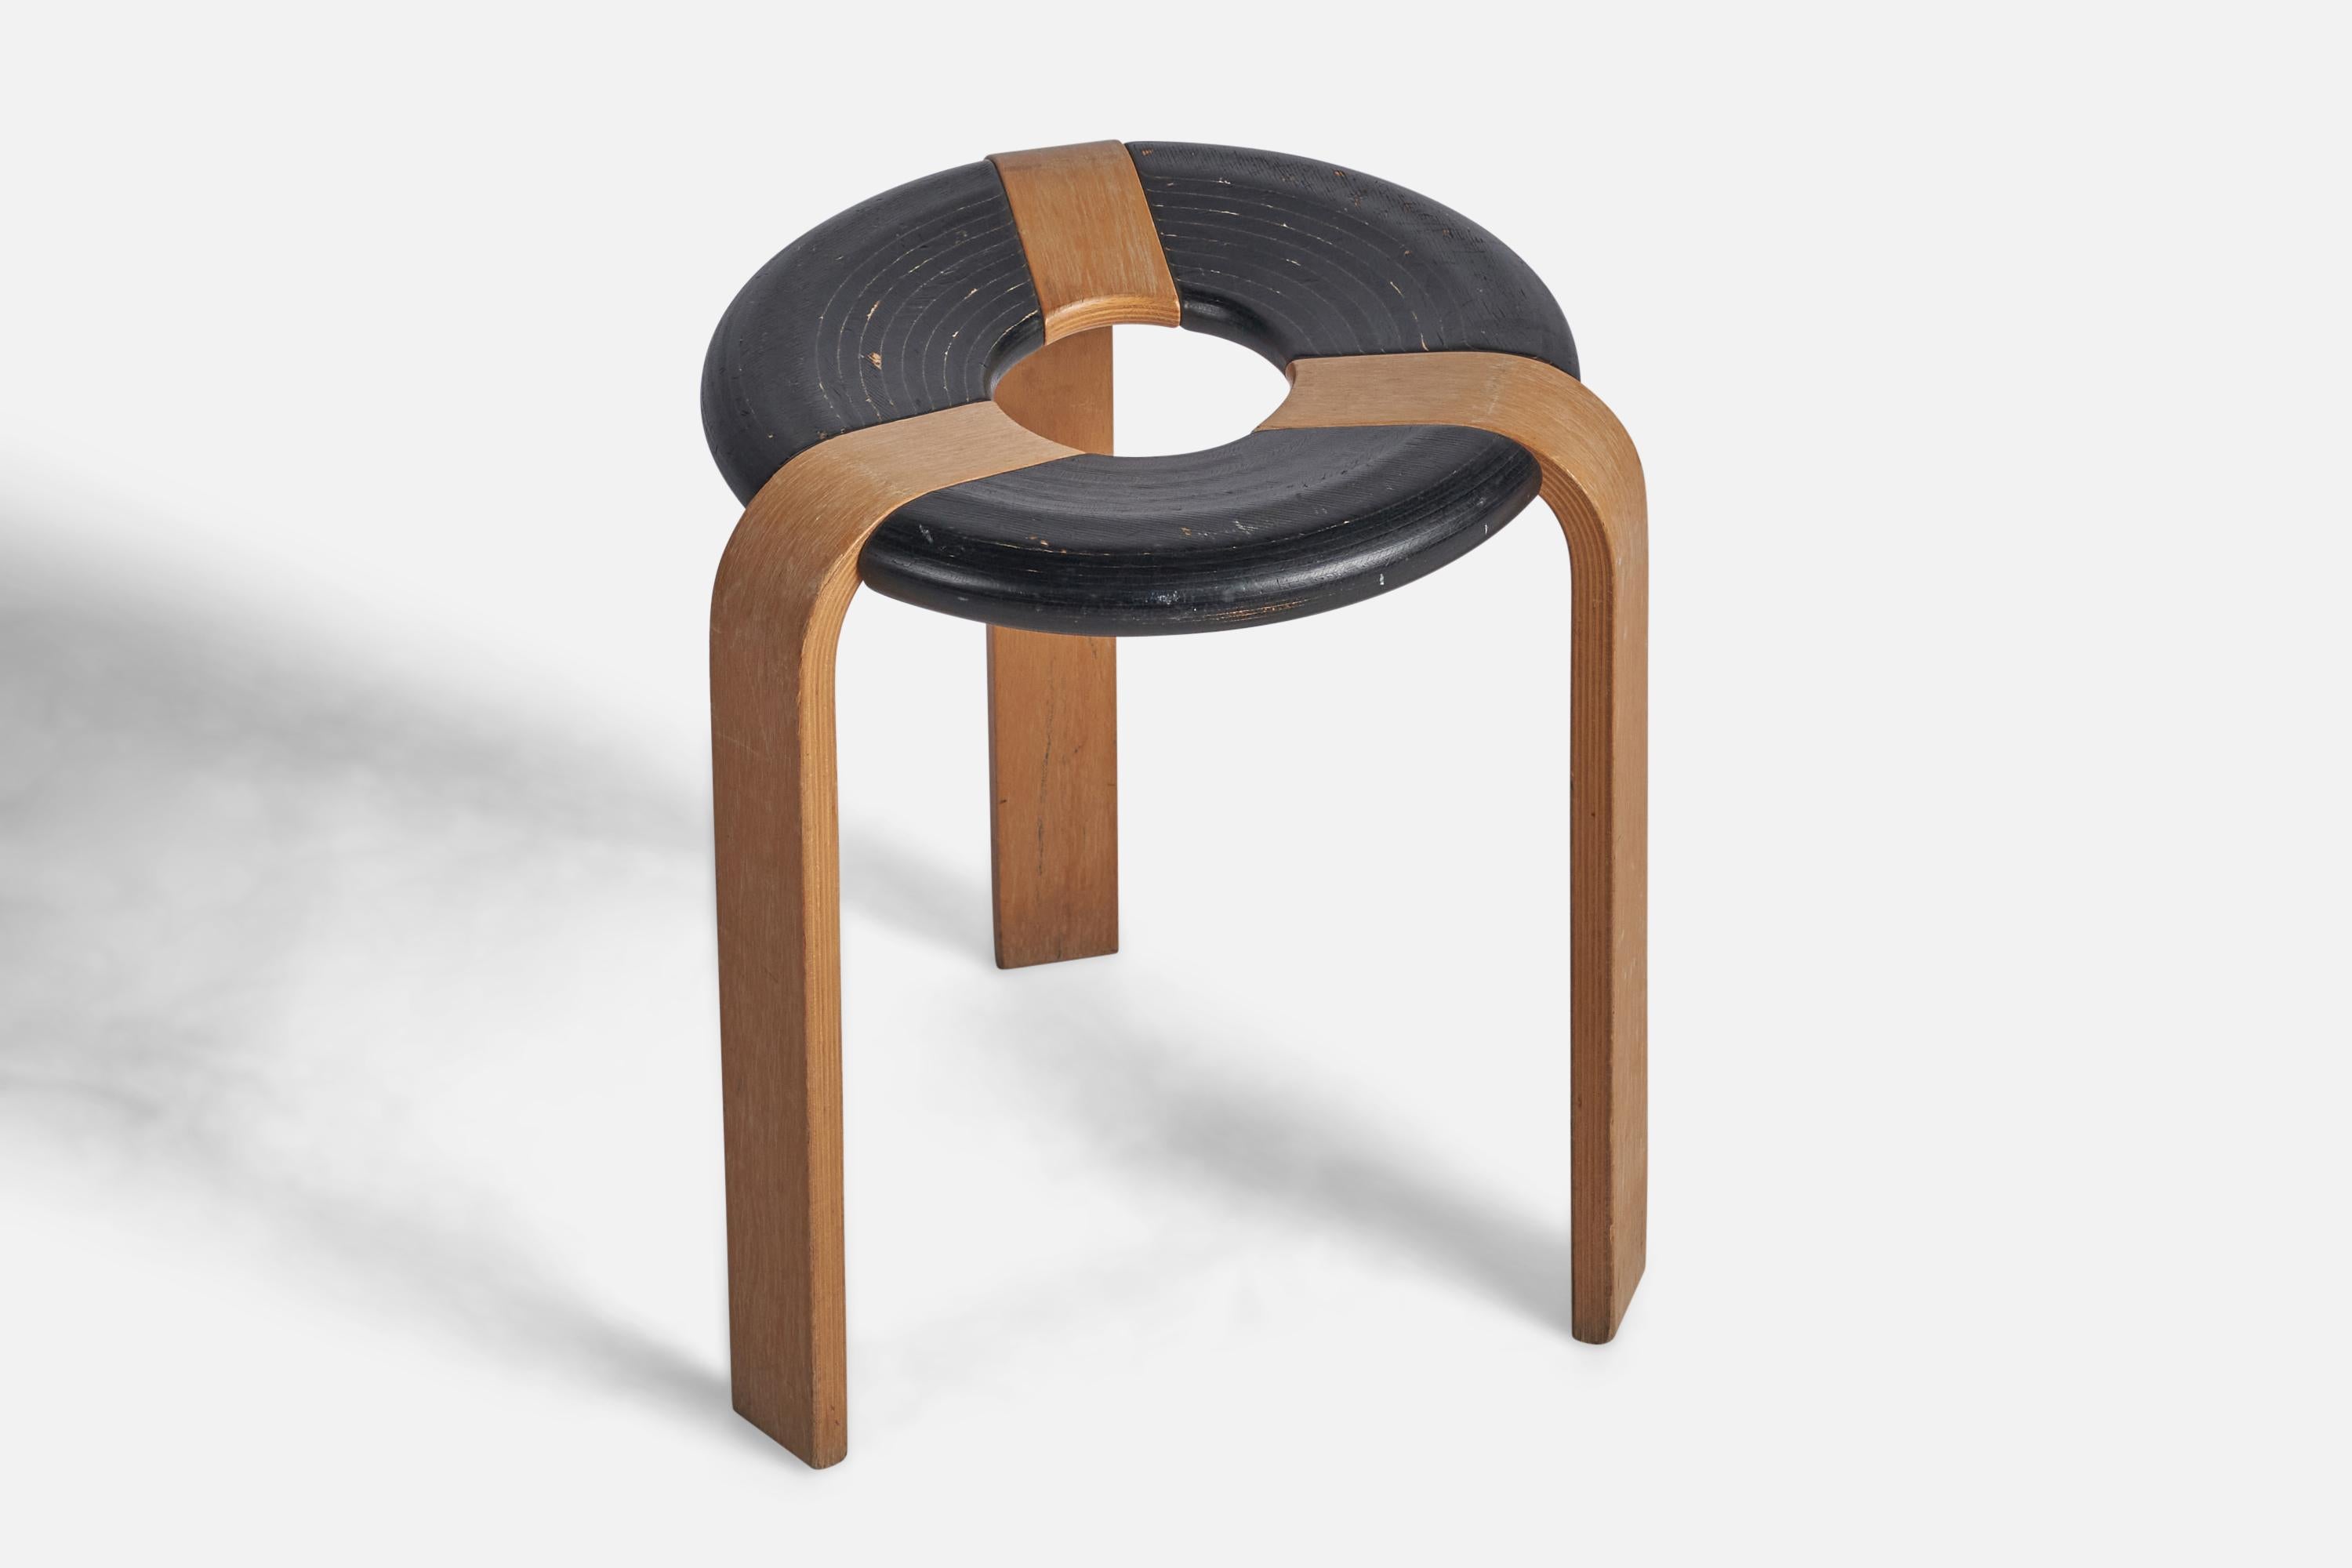 A black-painted oak stool designed by Rud Thygesen and produced by Magnus Olsen, Denmark, 1970s.